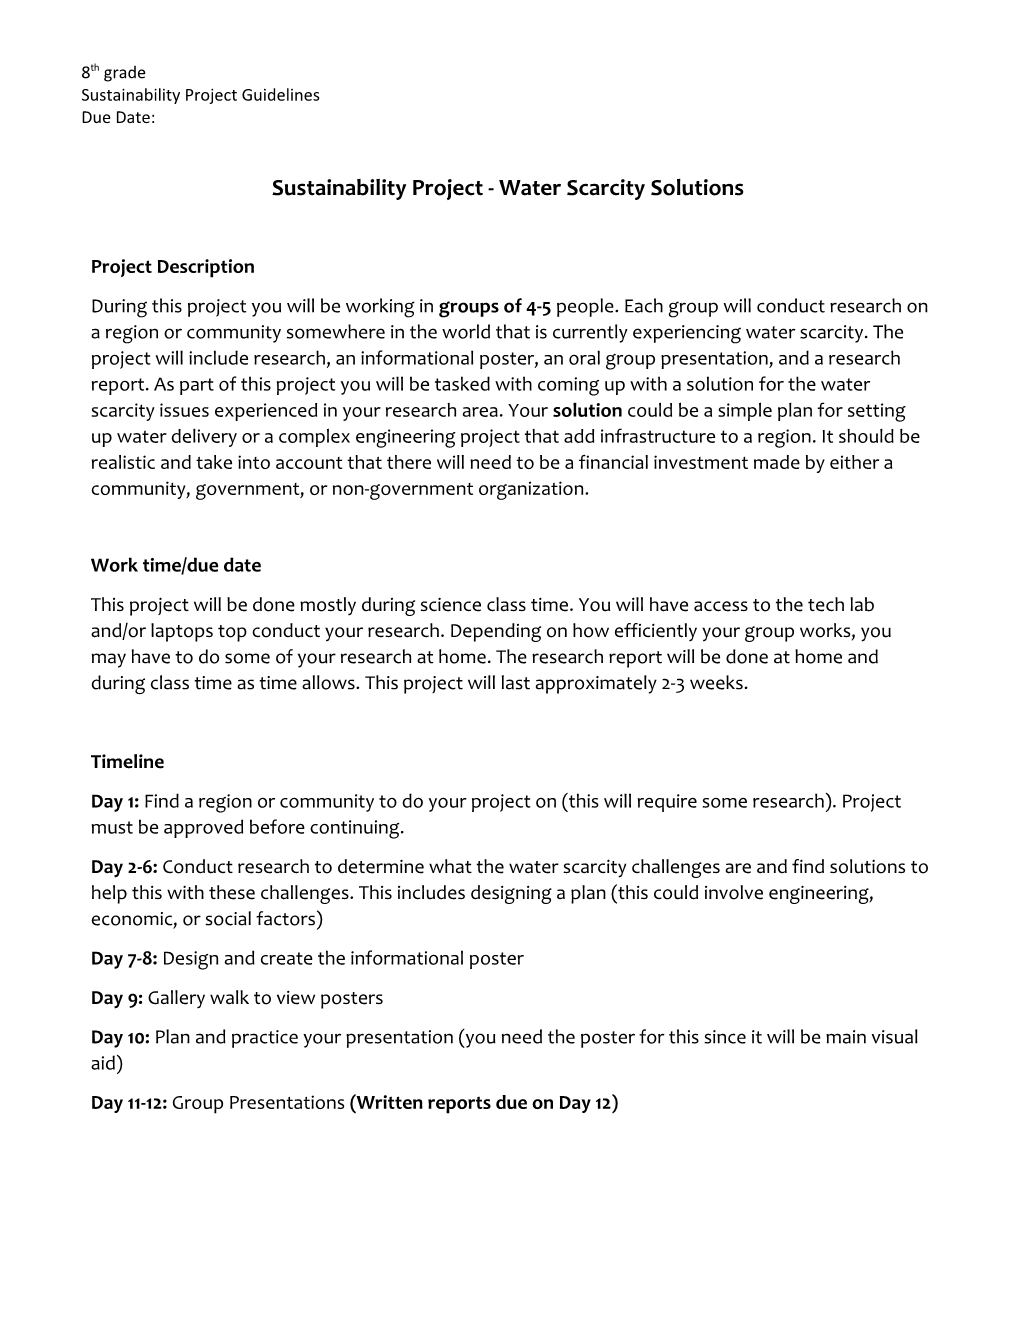 Sustainability Project - Water Scarcity Solutions